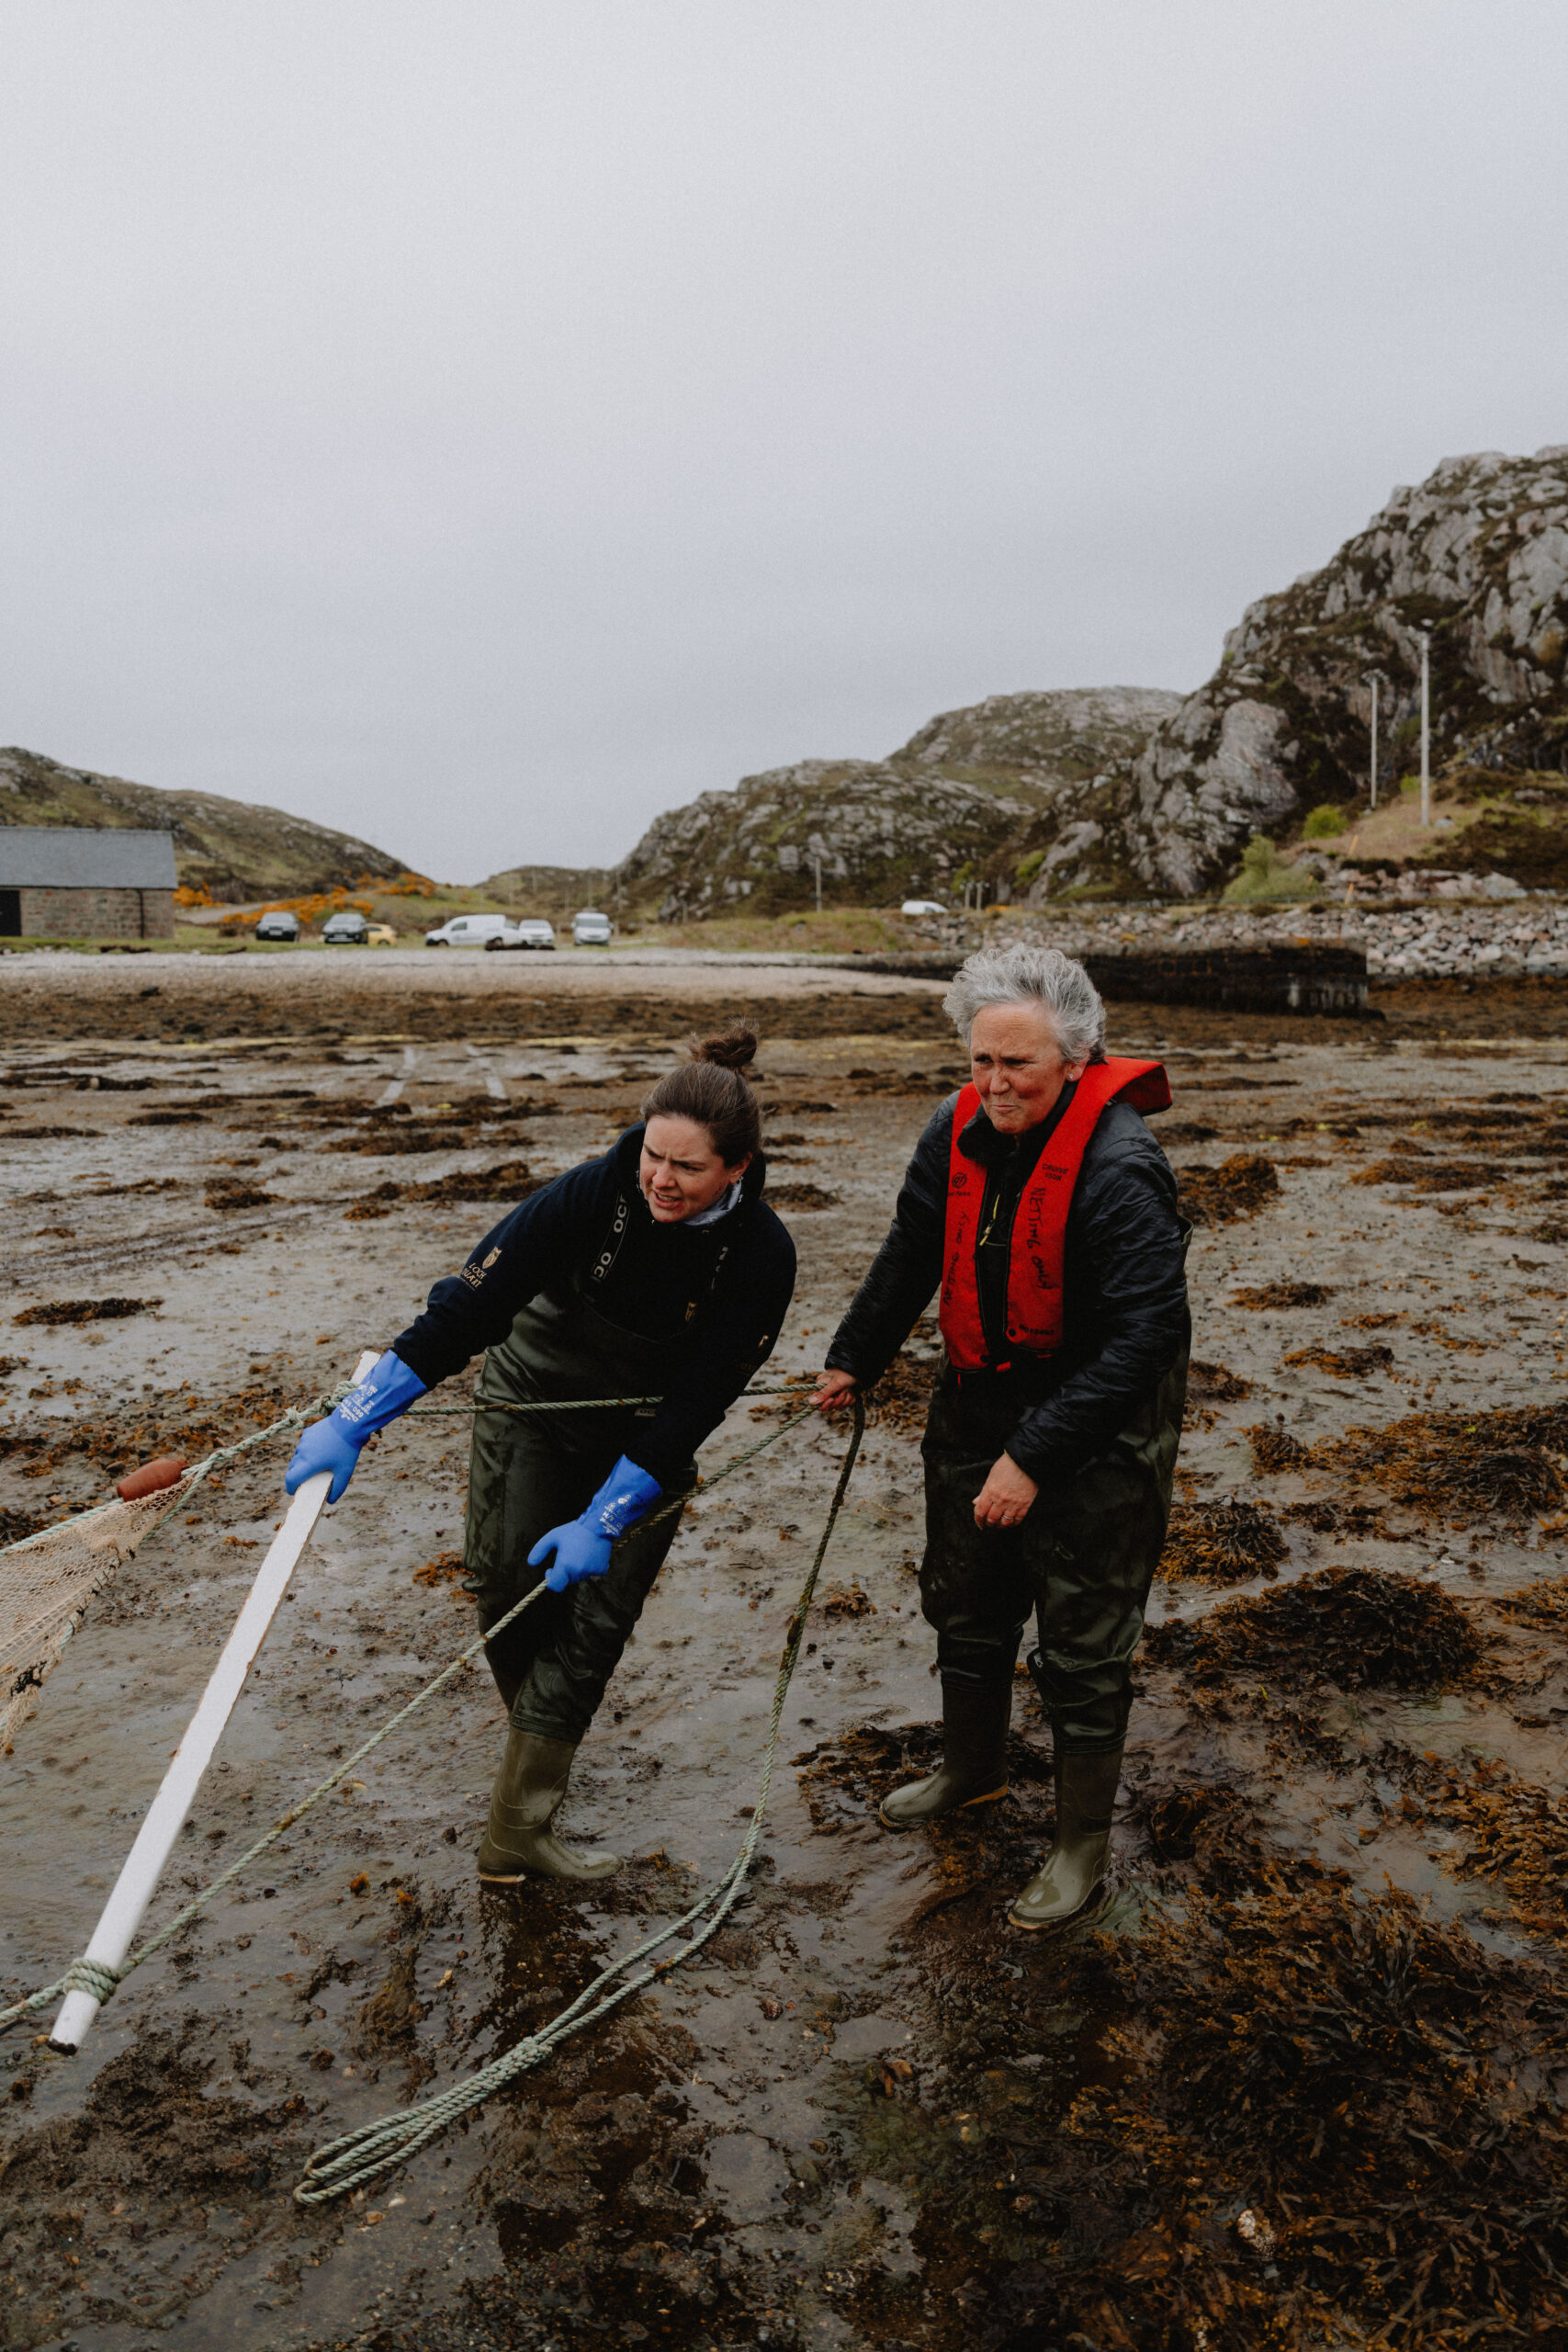 West Sutherland Fisheries Trust given unmatched access to audit Loch Duart Salmon